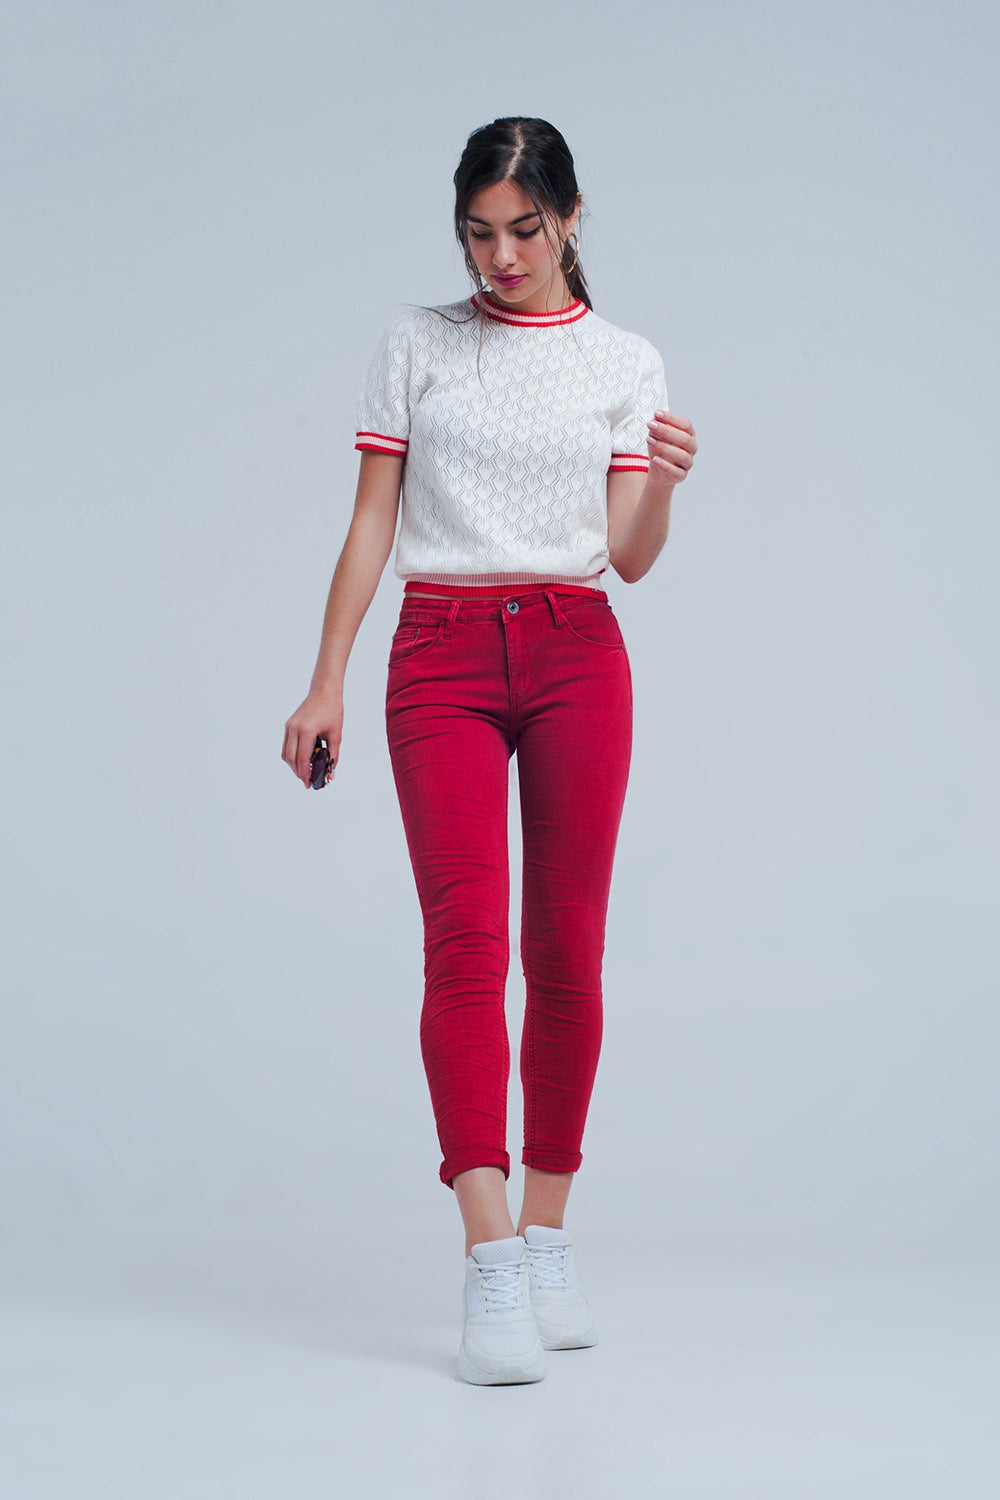 Q2-Red mid rise skinny jeans-Jeans